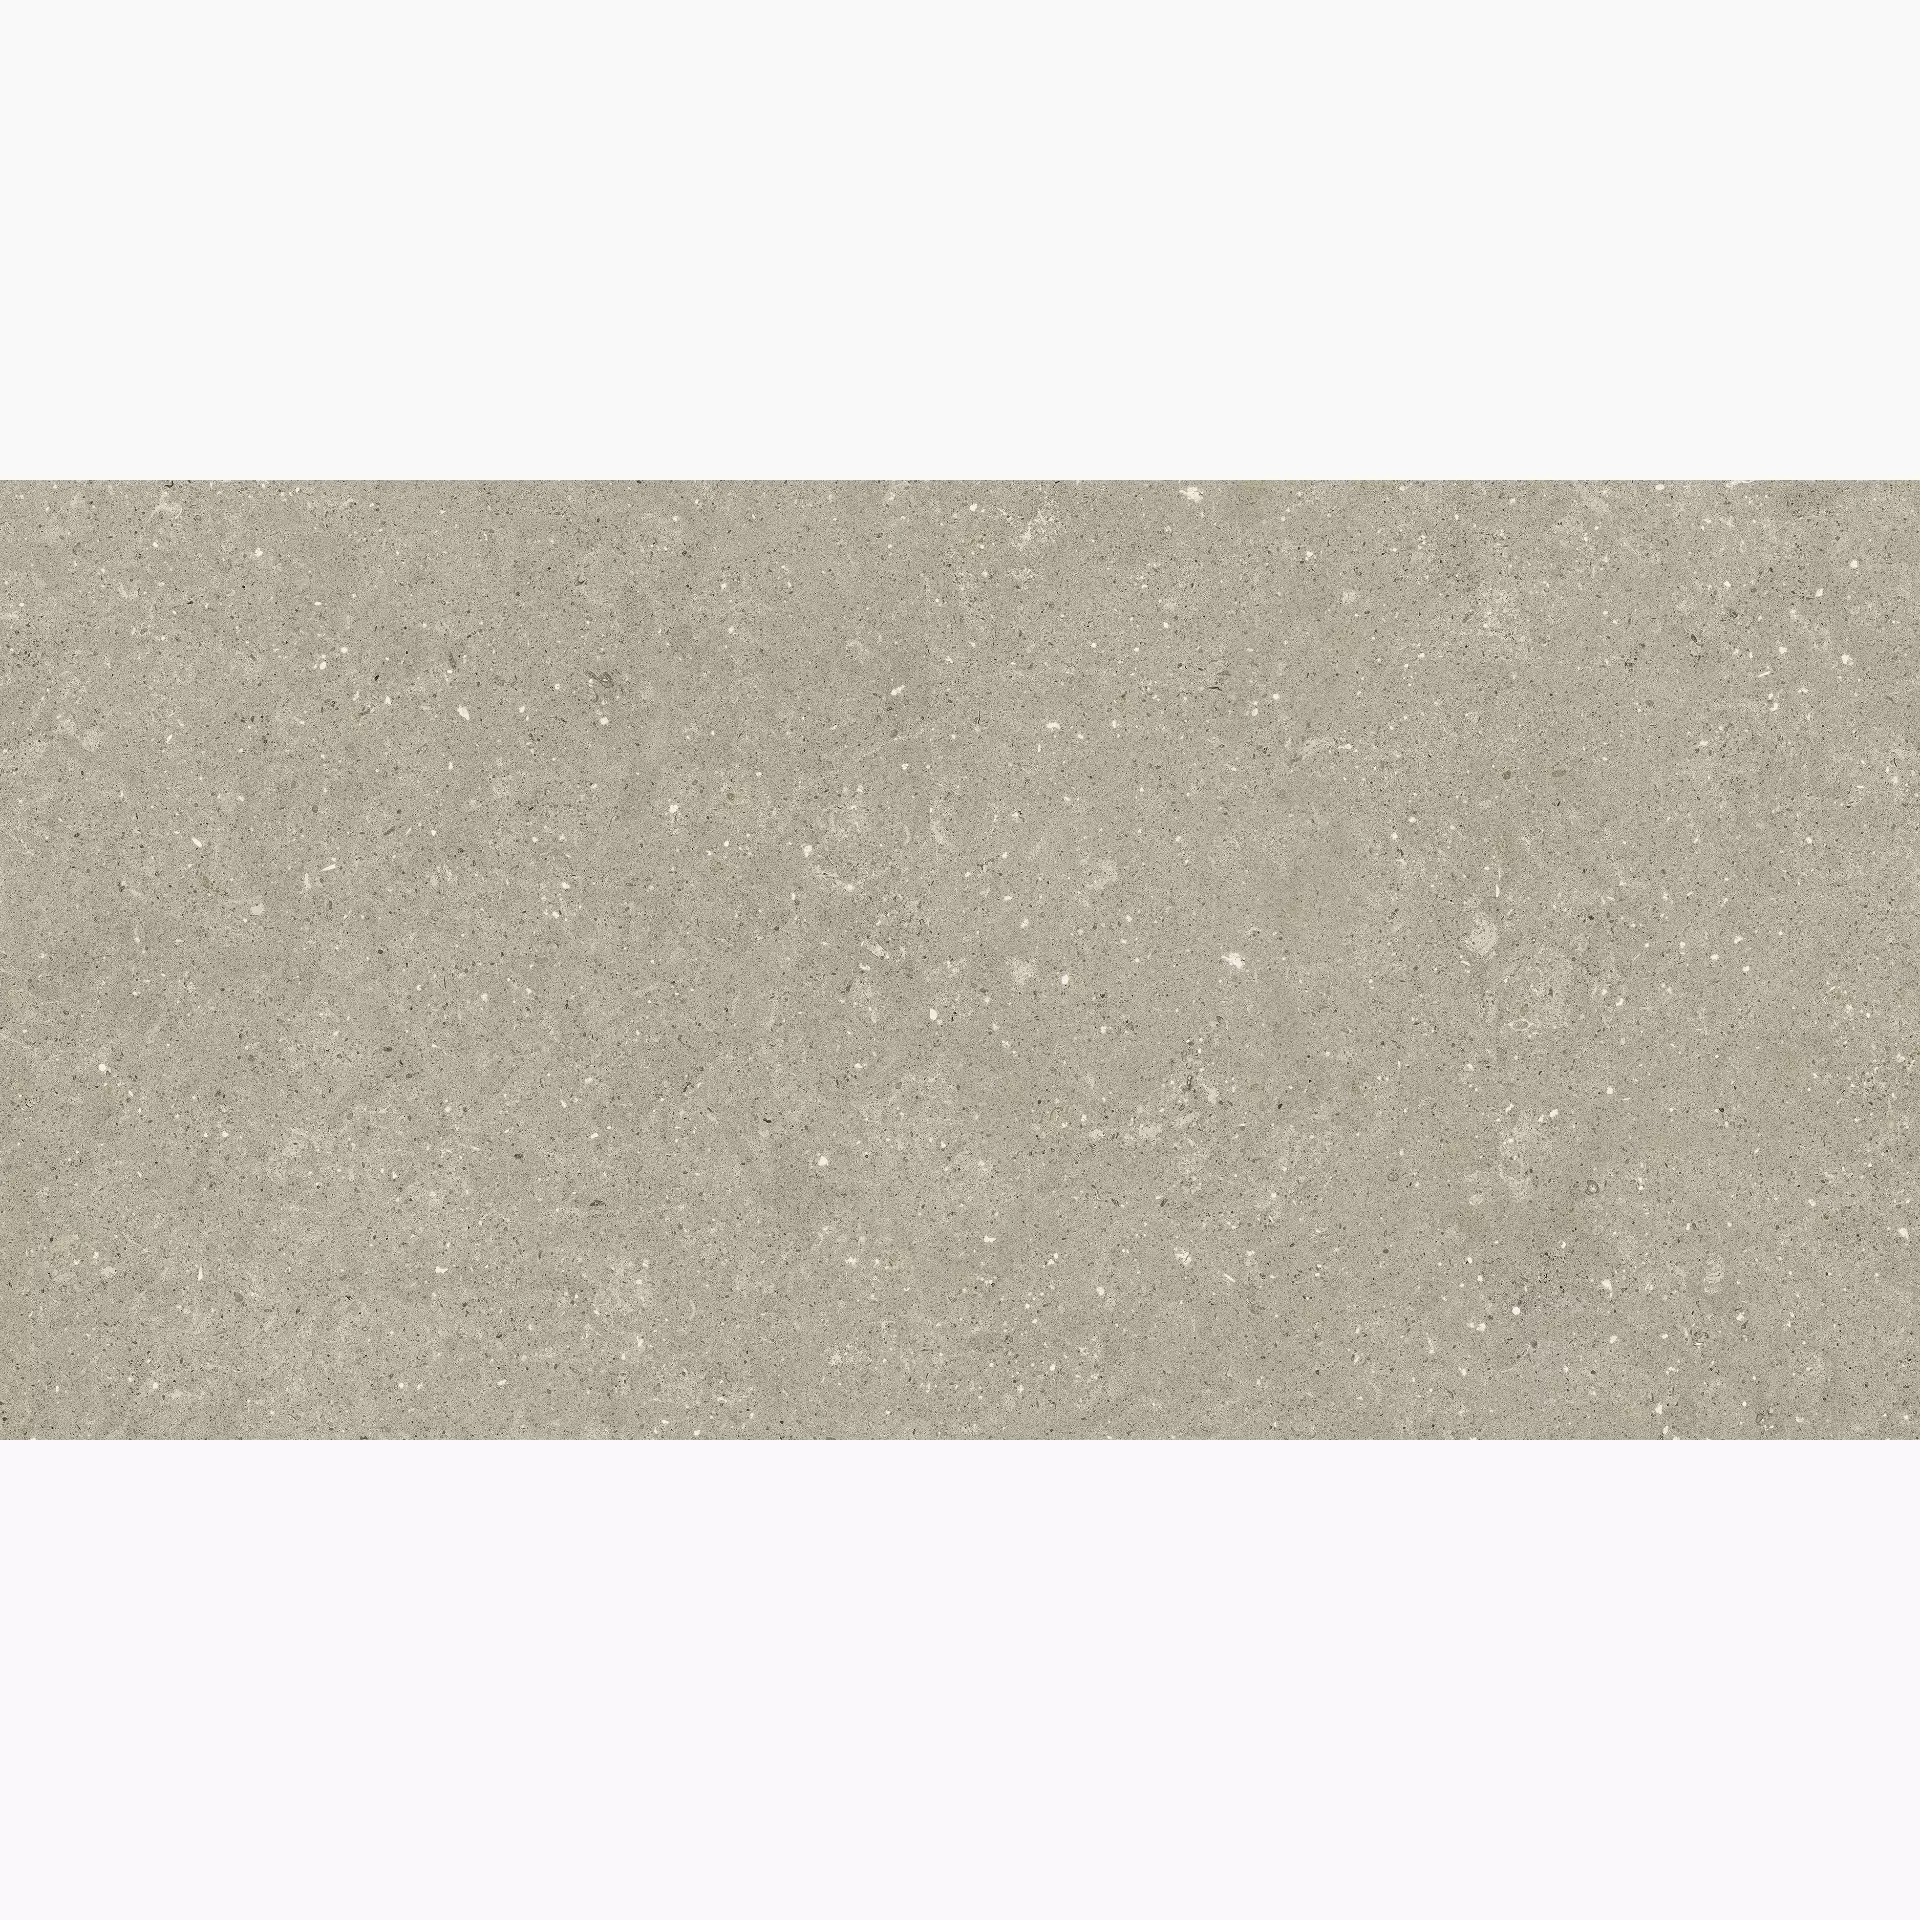 Del Conca Hwd Wild Greige Hwd Naturale GCWD11R 60x120cm rectified 8,5mm